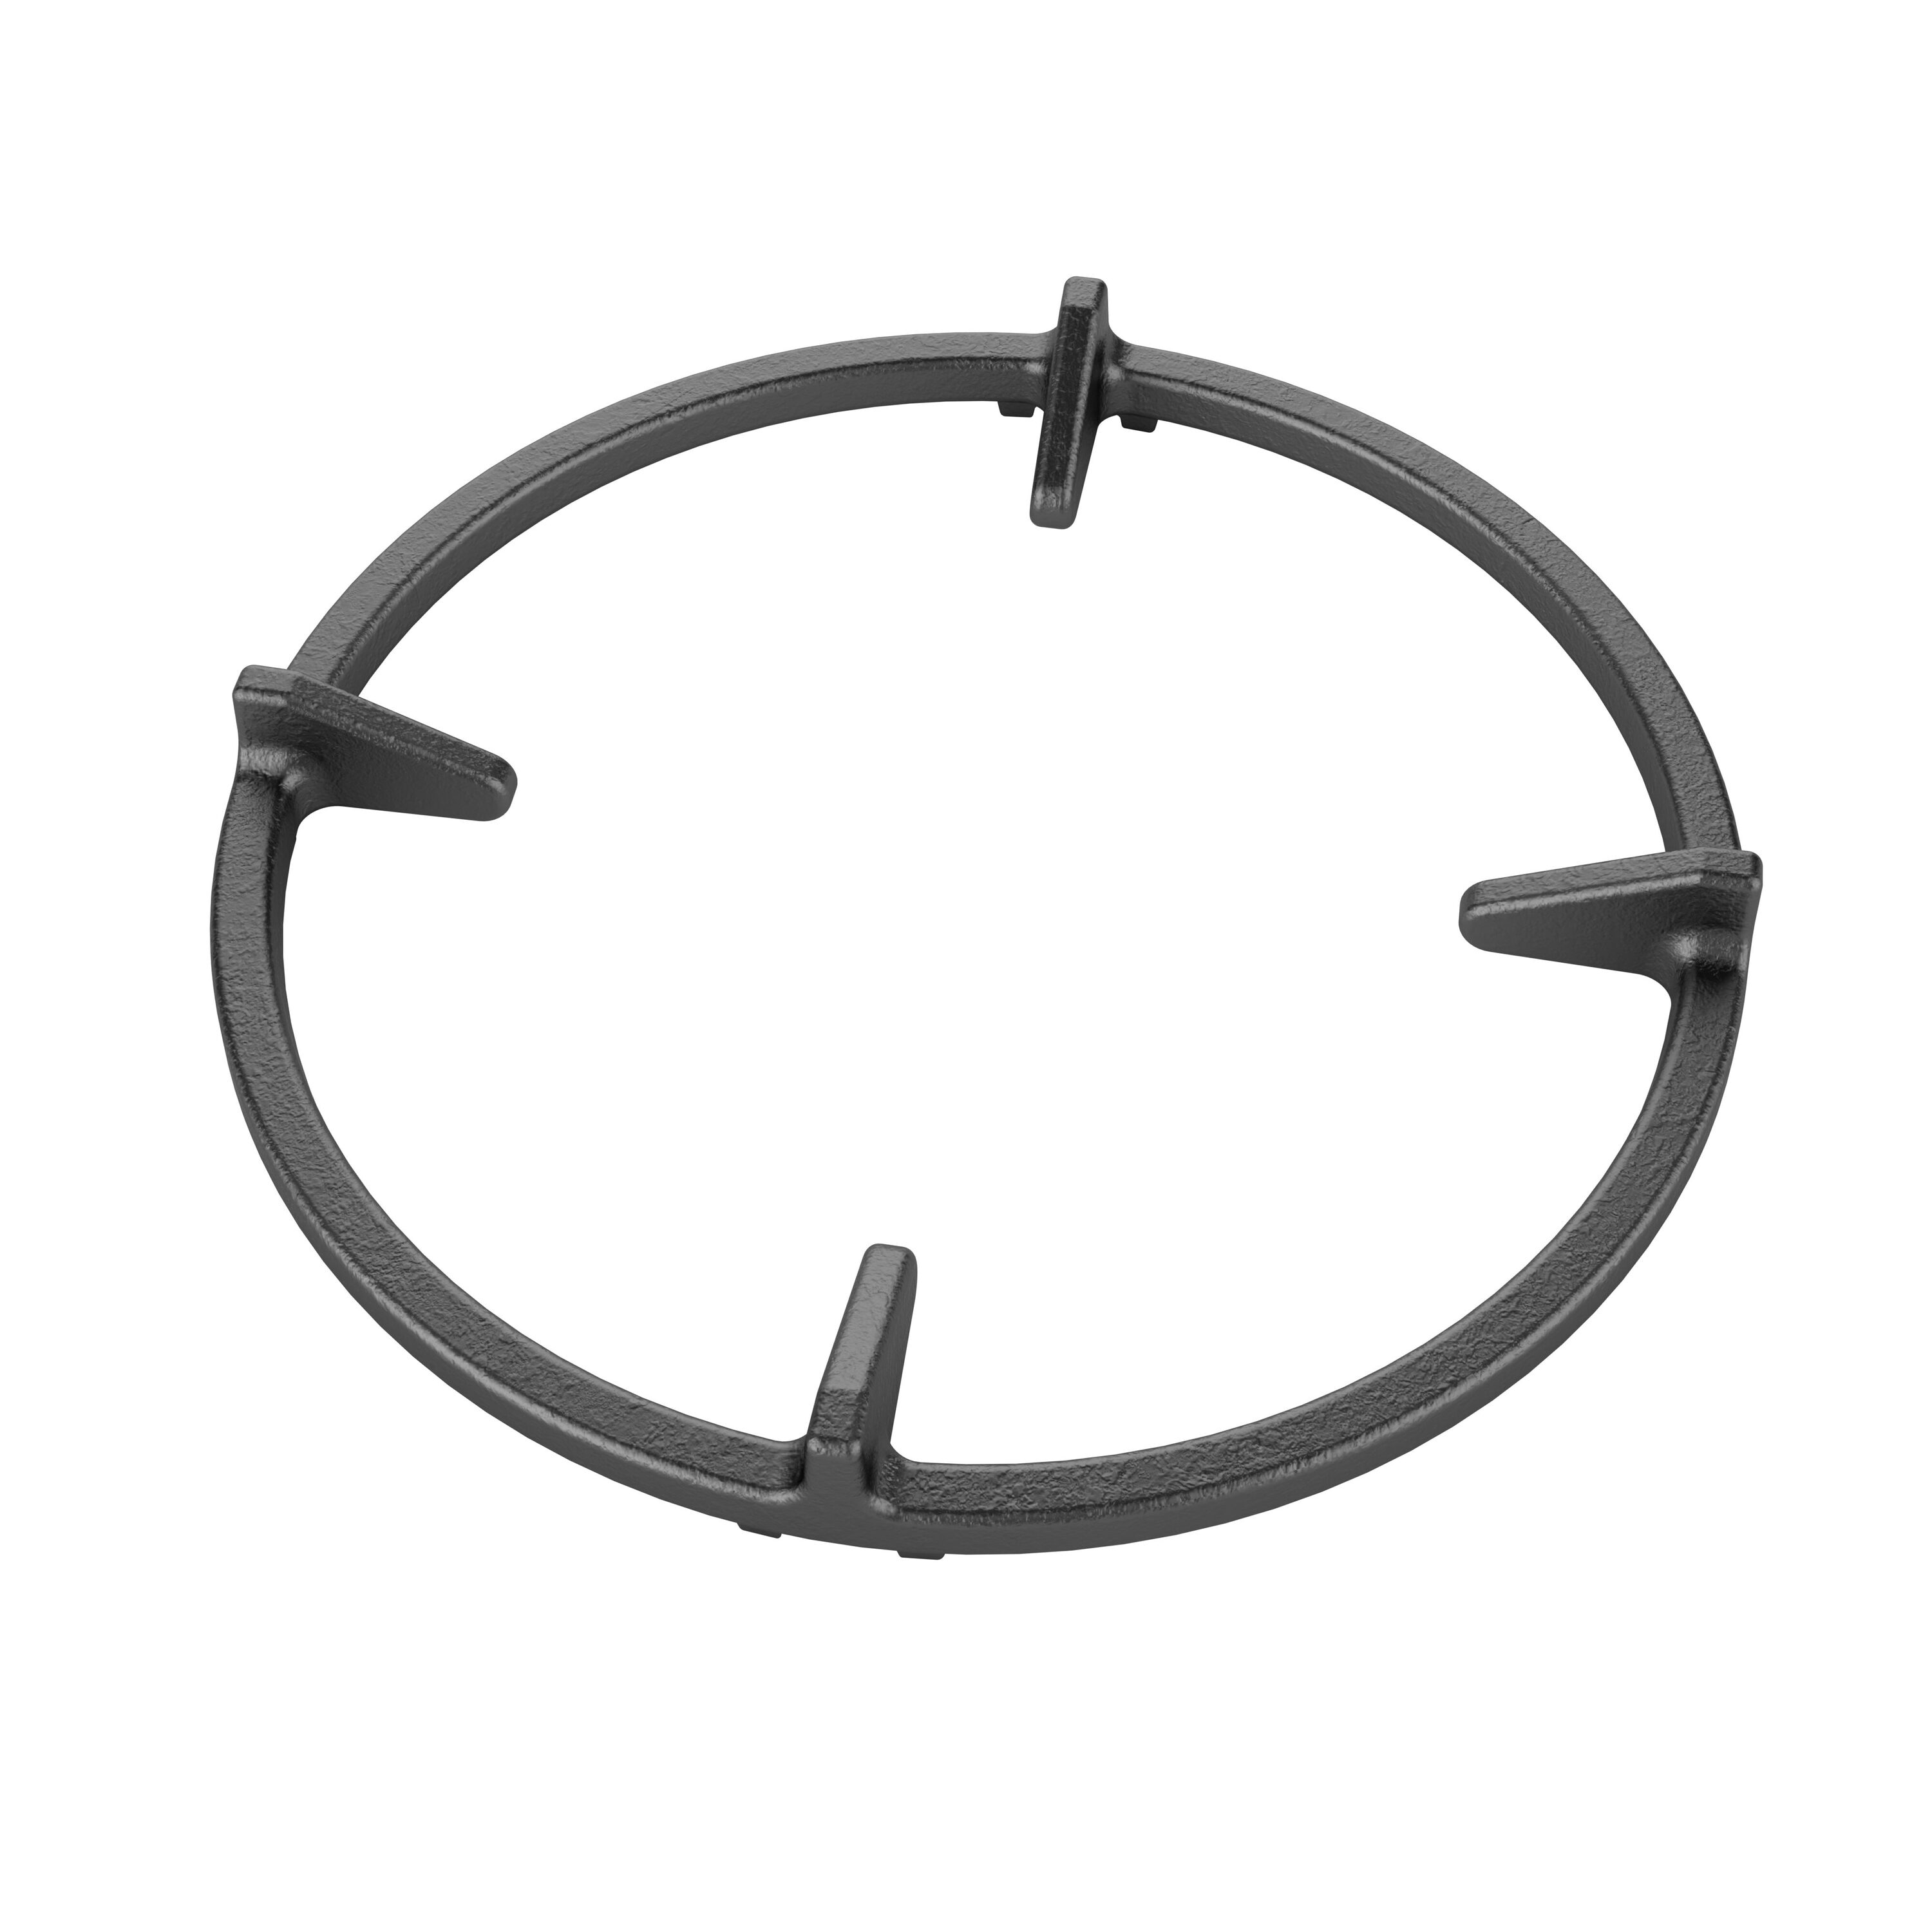 Linkidea Wok Ring for GAS Stove 5 Claw Non-Slip Black Cast Iron Wok Support Ring for Kitchen Cooktop Range Pan Holder Stand Stove Rack for GAS Hob